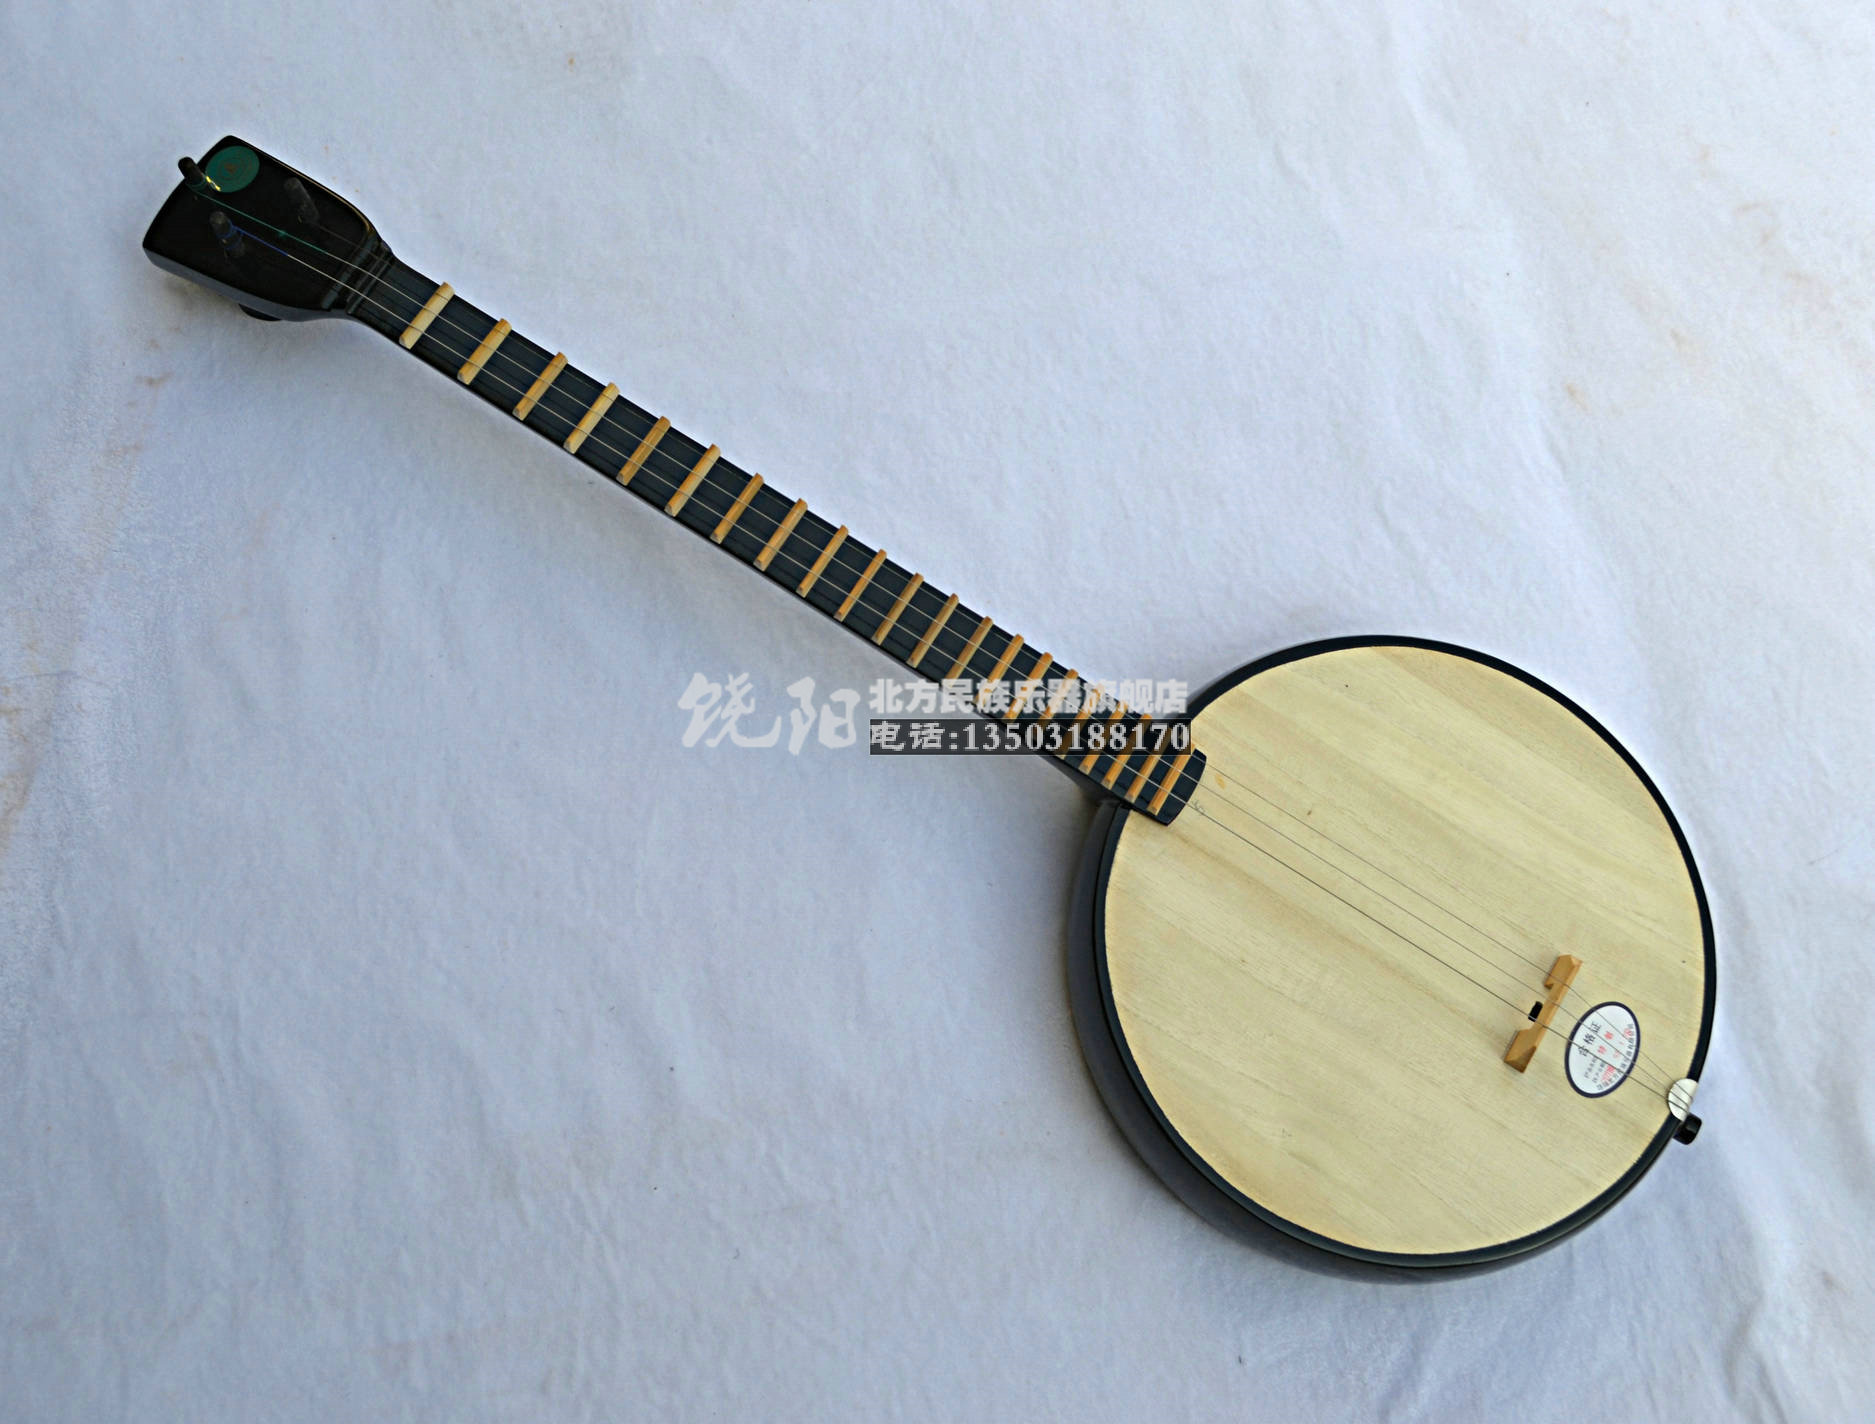 HEBEI RAOYANG NORTH NATIONAL MUSICAL INSTRUMENT FACTORY DIRECT  STORE SPECIAL QINQIN  Ǳ  Ǳ  QINQIN